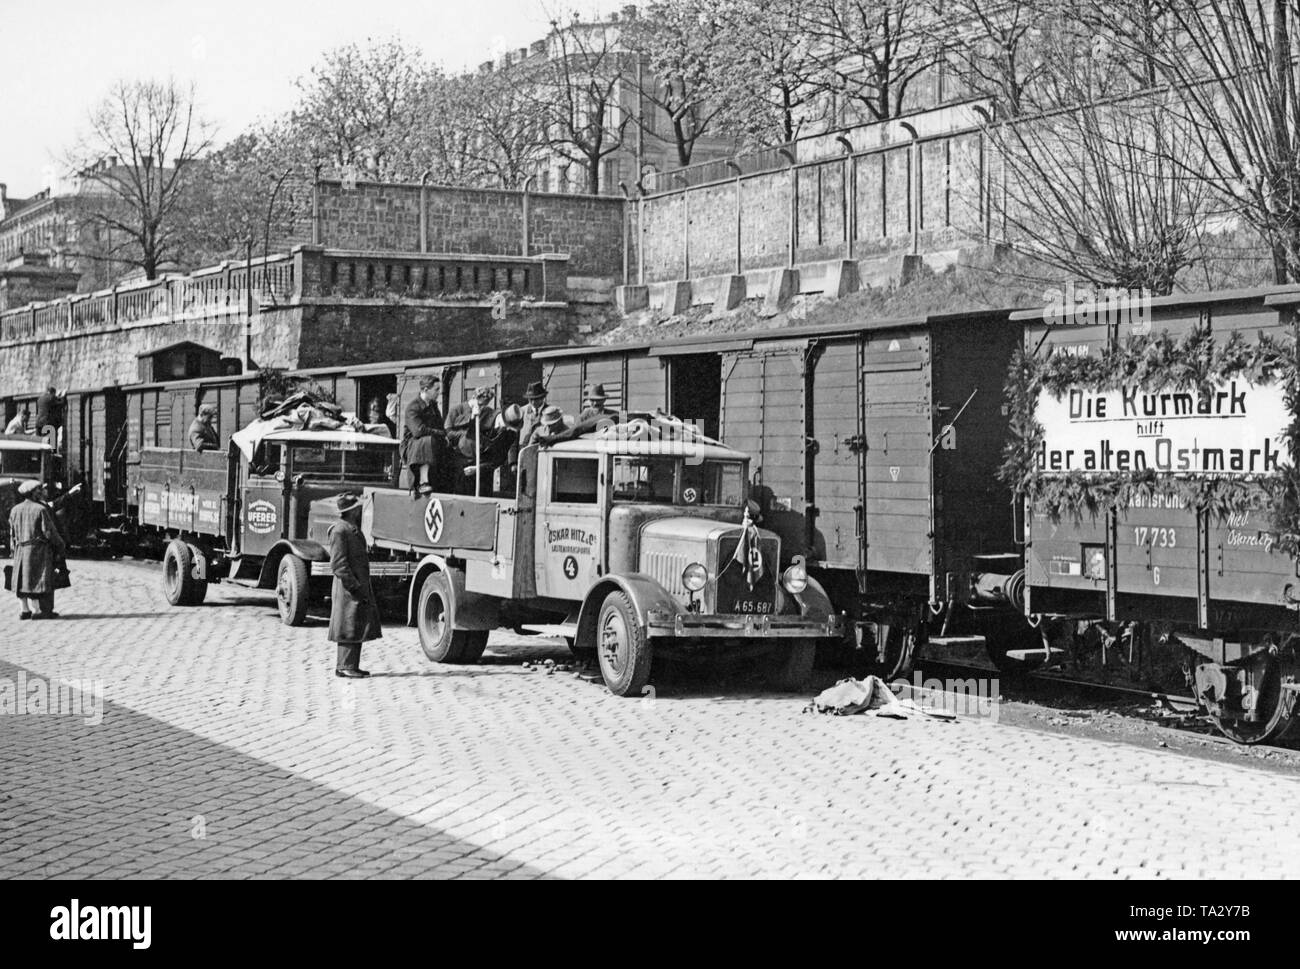 After the annexation of Austria to the German Reich food is sent from Germany to Austria. Arrival of food transporters in Vienna. On a train is written: 'The Kurmark (Electoral March) helps the old Ostmark (Nazi name for Austria)'. Stock Photo